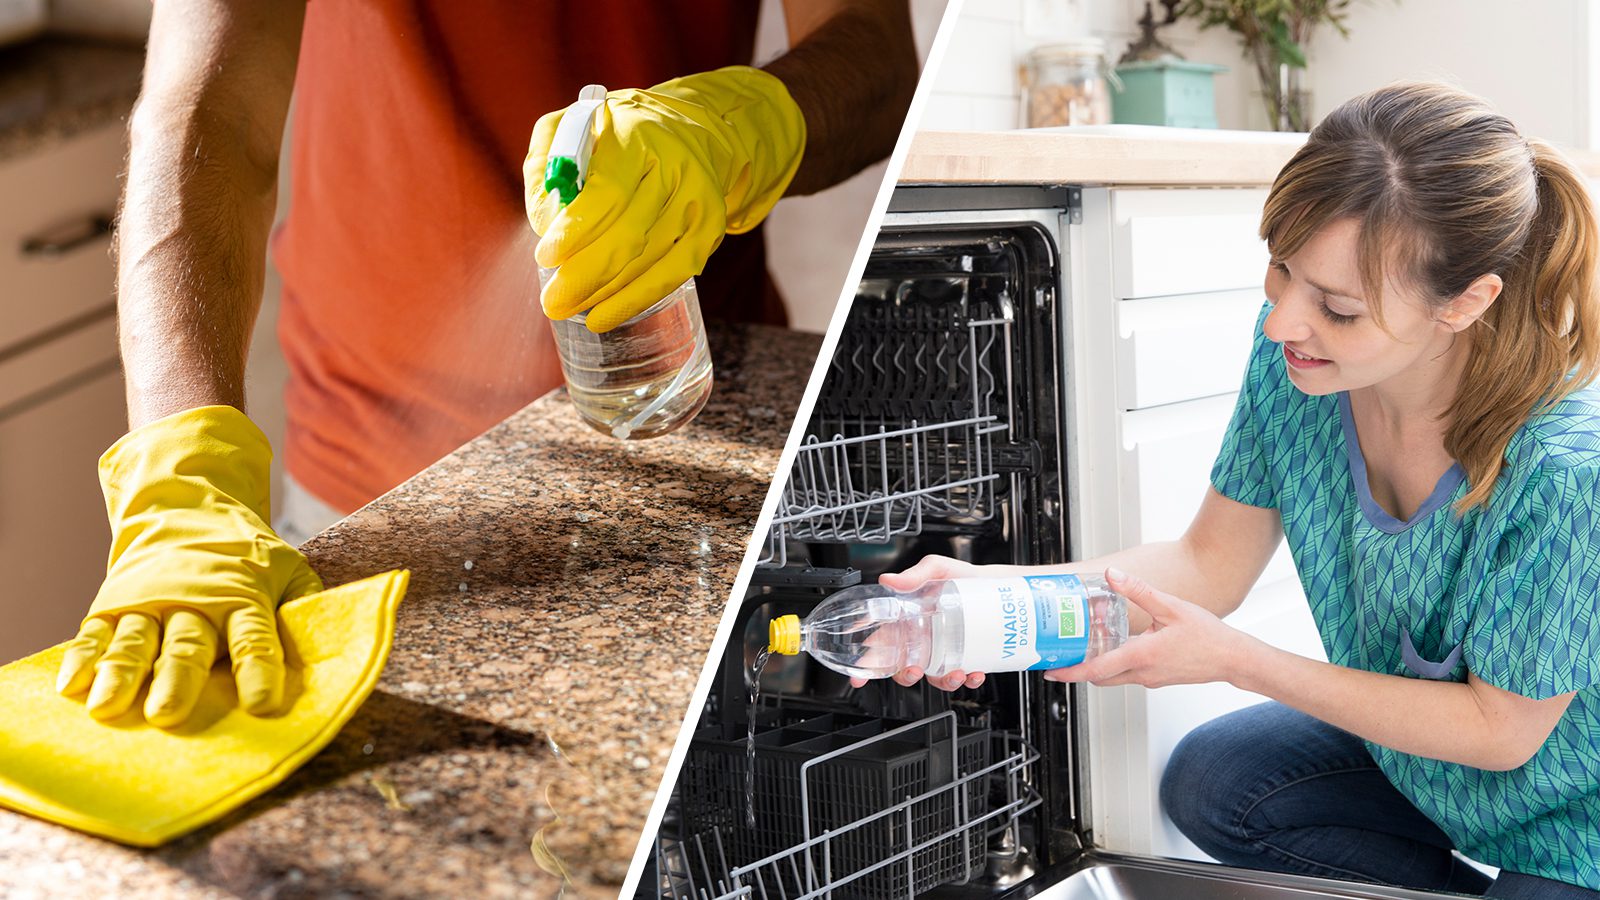 20 Things to Never Clean With White Vinegar (and 20 Things You Can)